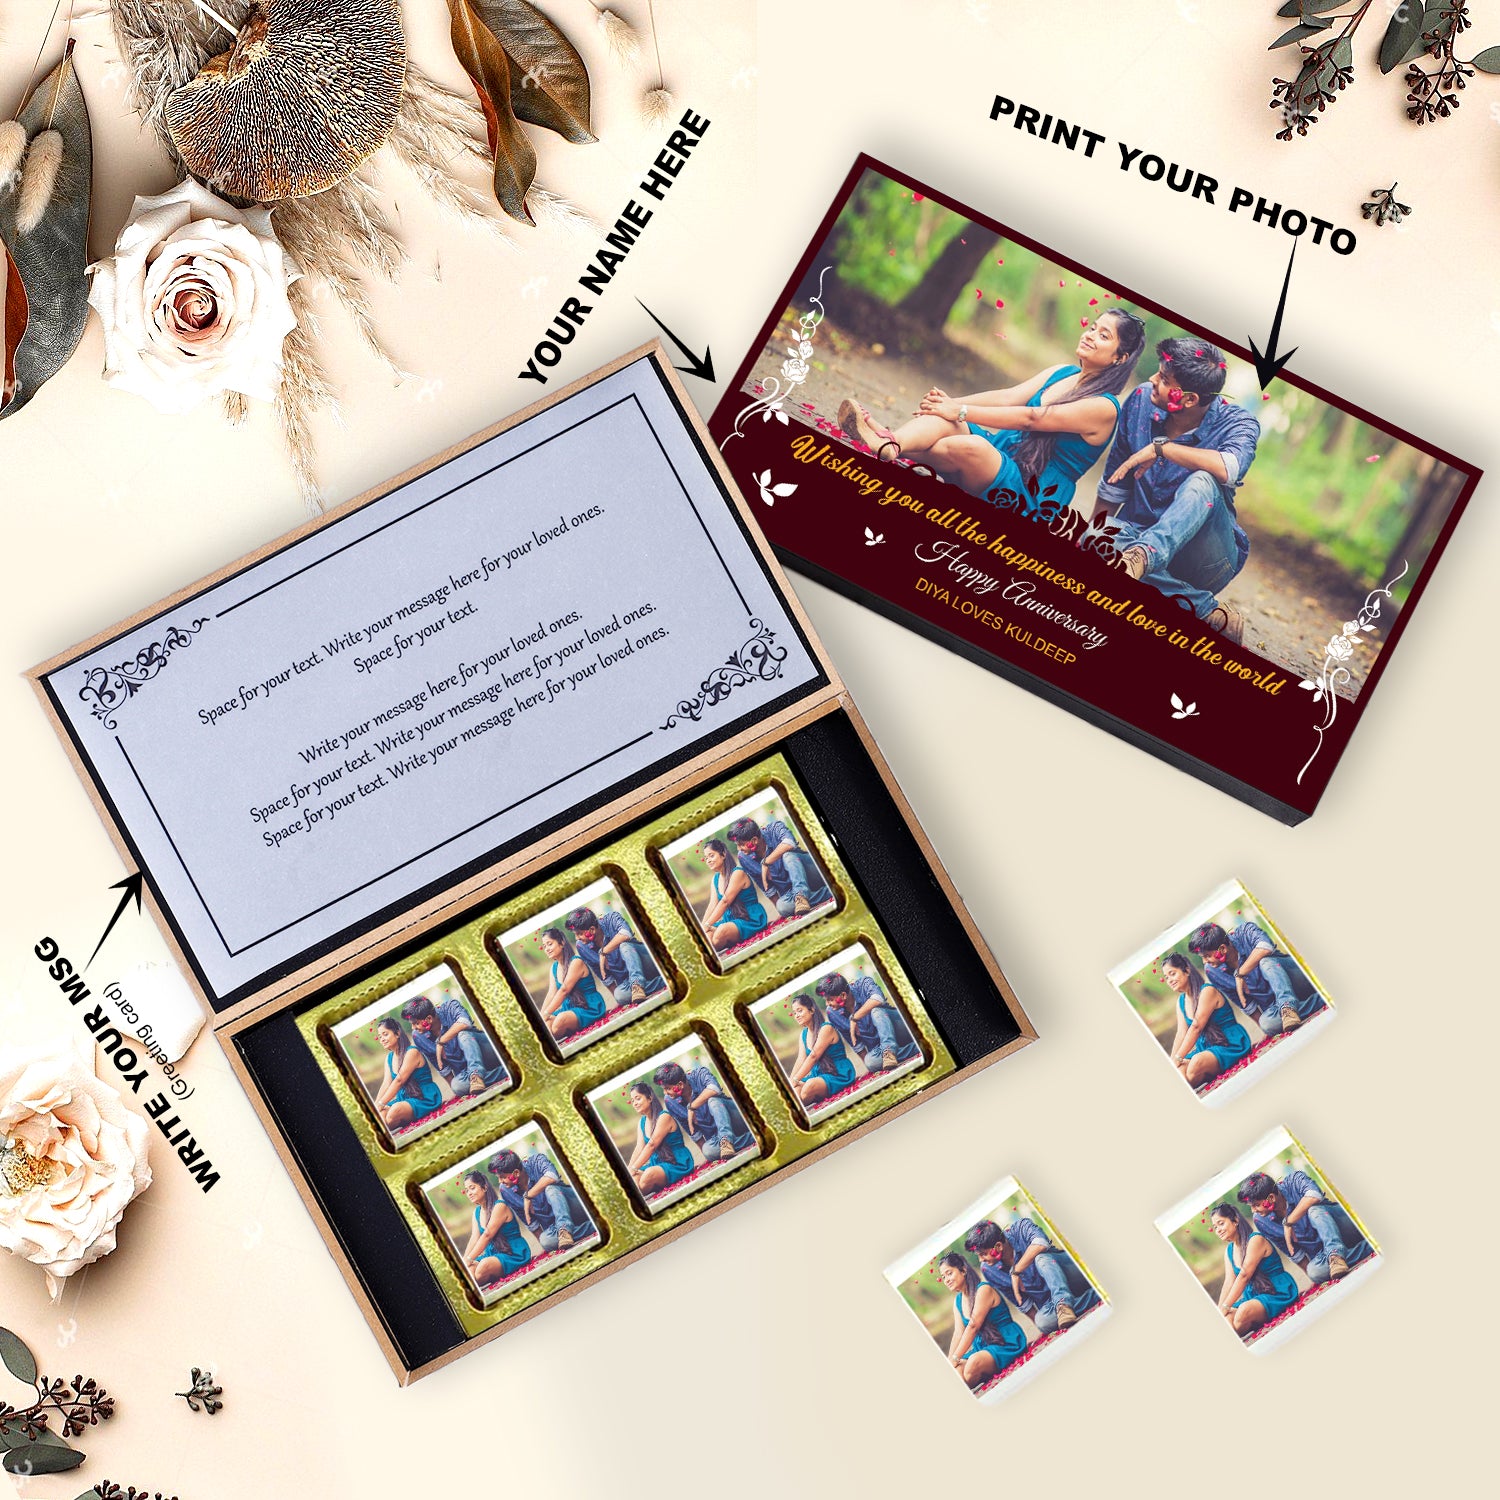 Photo printed on wrapper and box of chocolates.Best chocolate gift for anniversary.